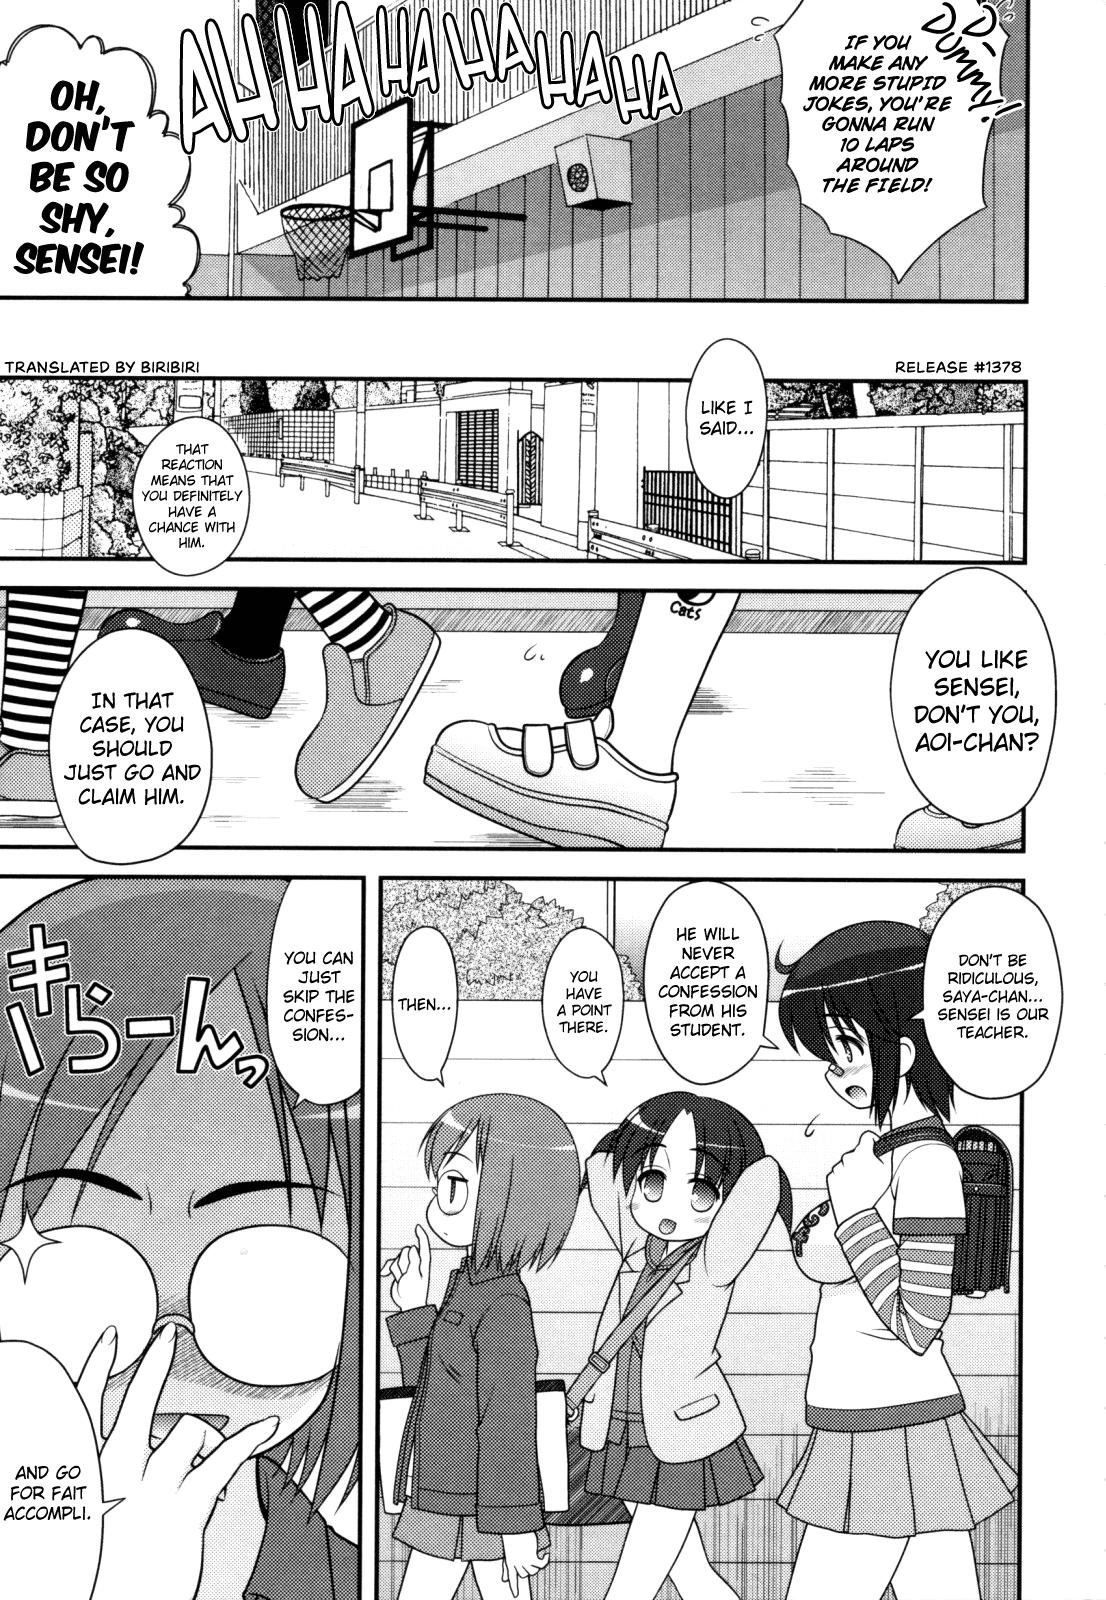 Colombia Aoi-chan Attack! Best Blowjob Ever - Page 9